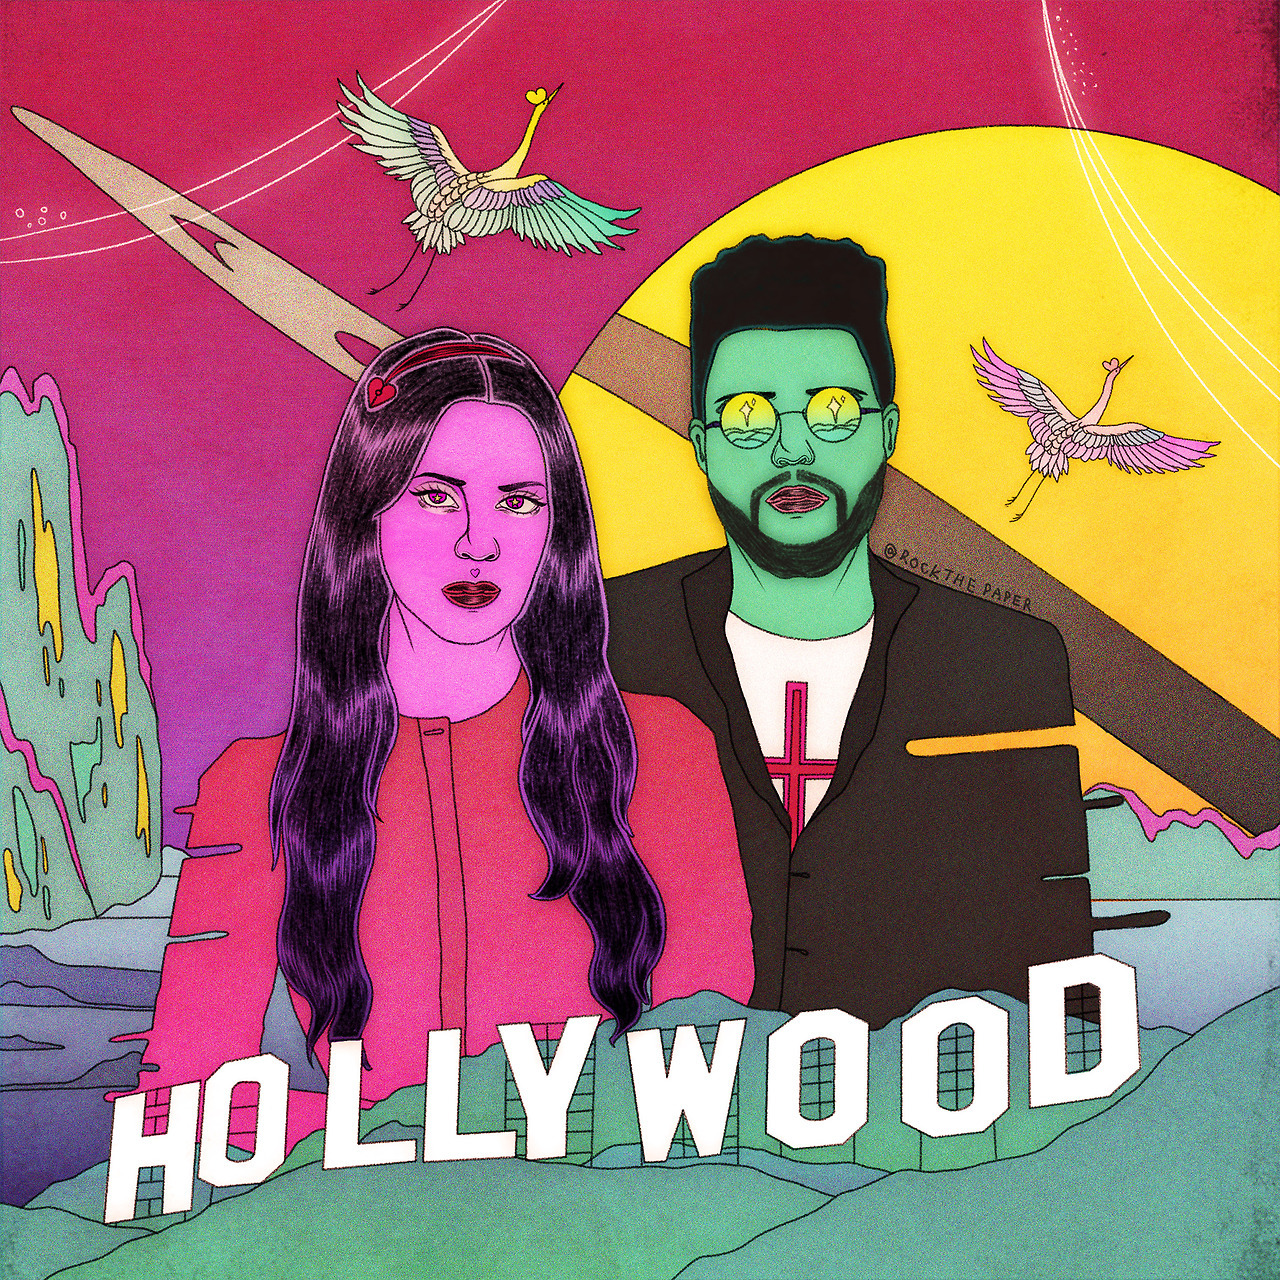 L O S T I N H O L L Y W O O D 🌴 When Stargirl and Starboy collides. ‘Cause we’re the masters of our own fate We’re the captains of our own souls Loving this 50,60s vibe, an intergalactic adventure Lana Del Rey & The Weeknd Artist l Rock The...